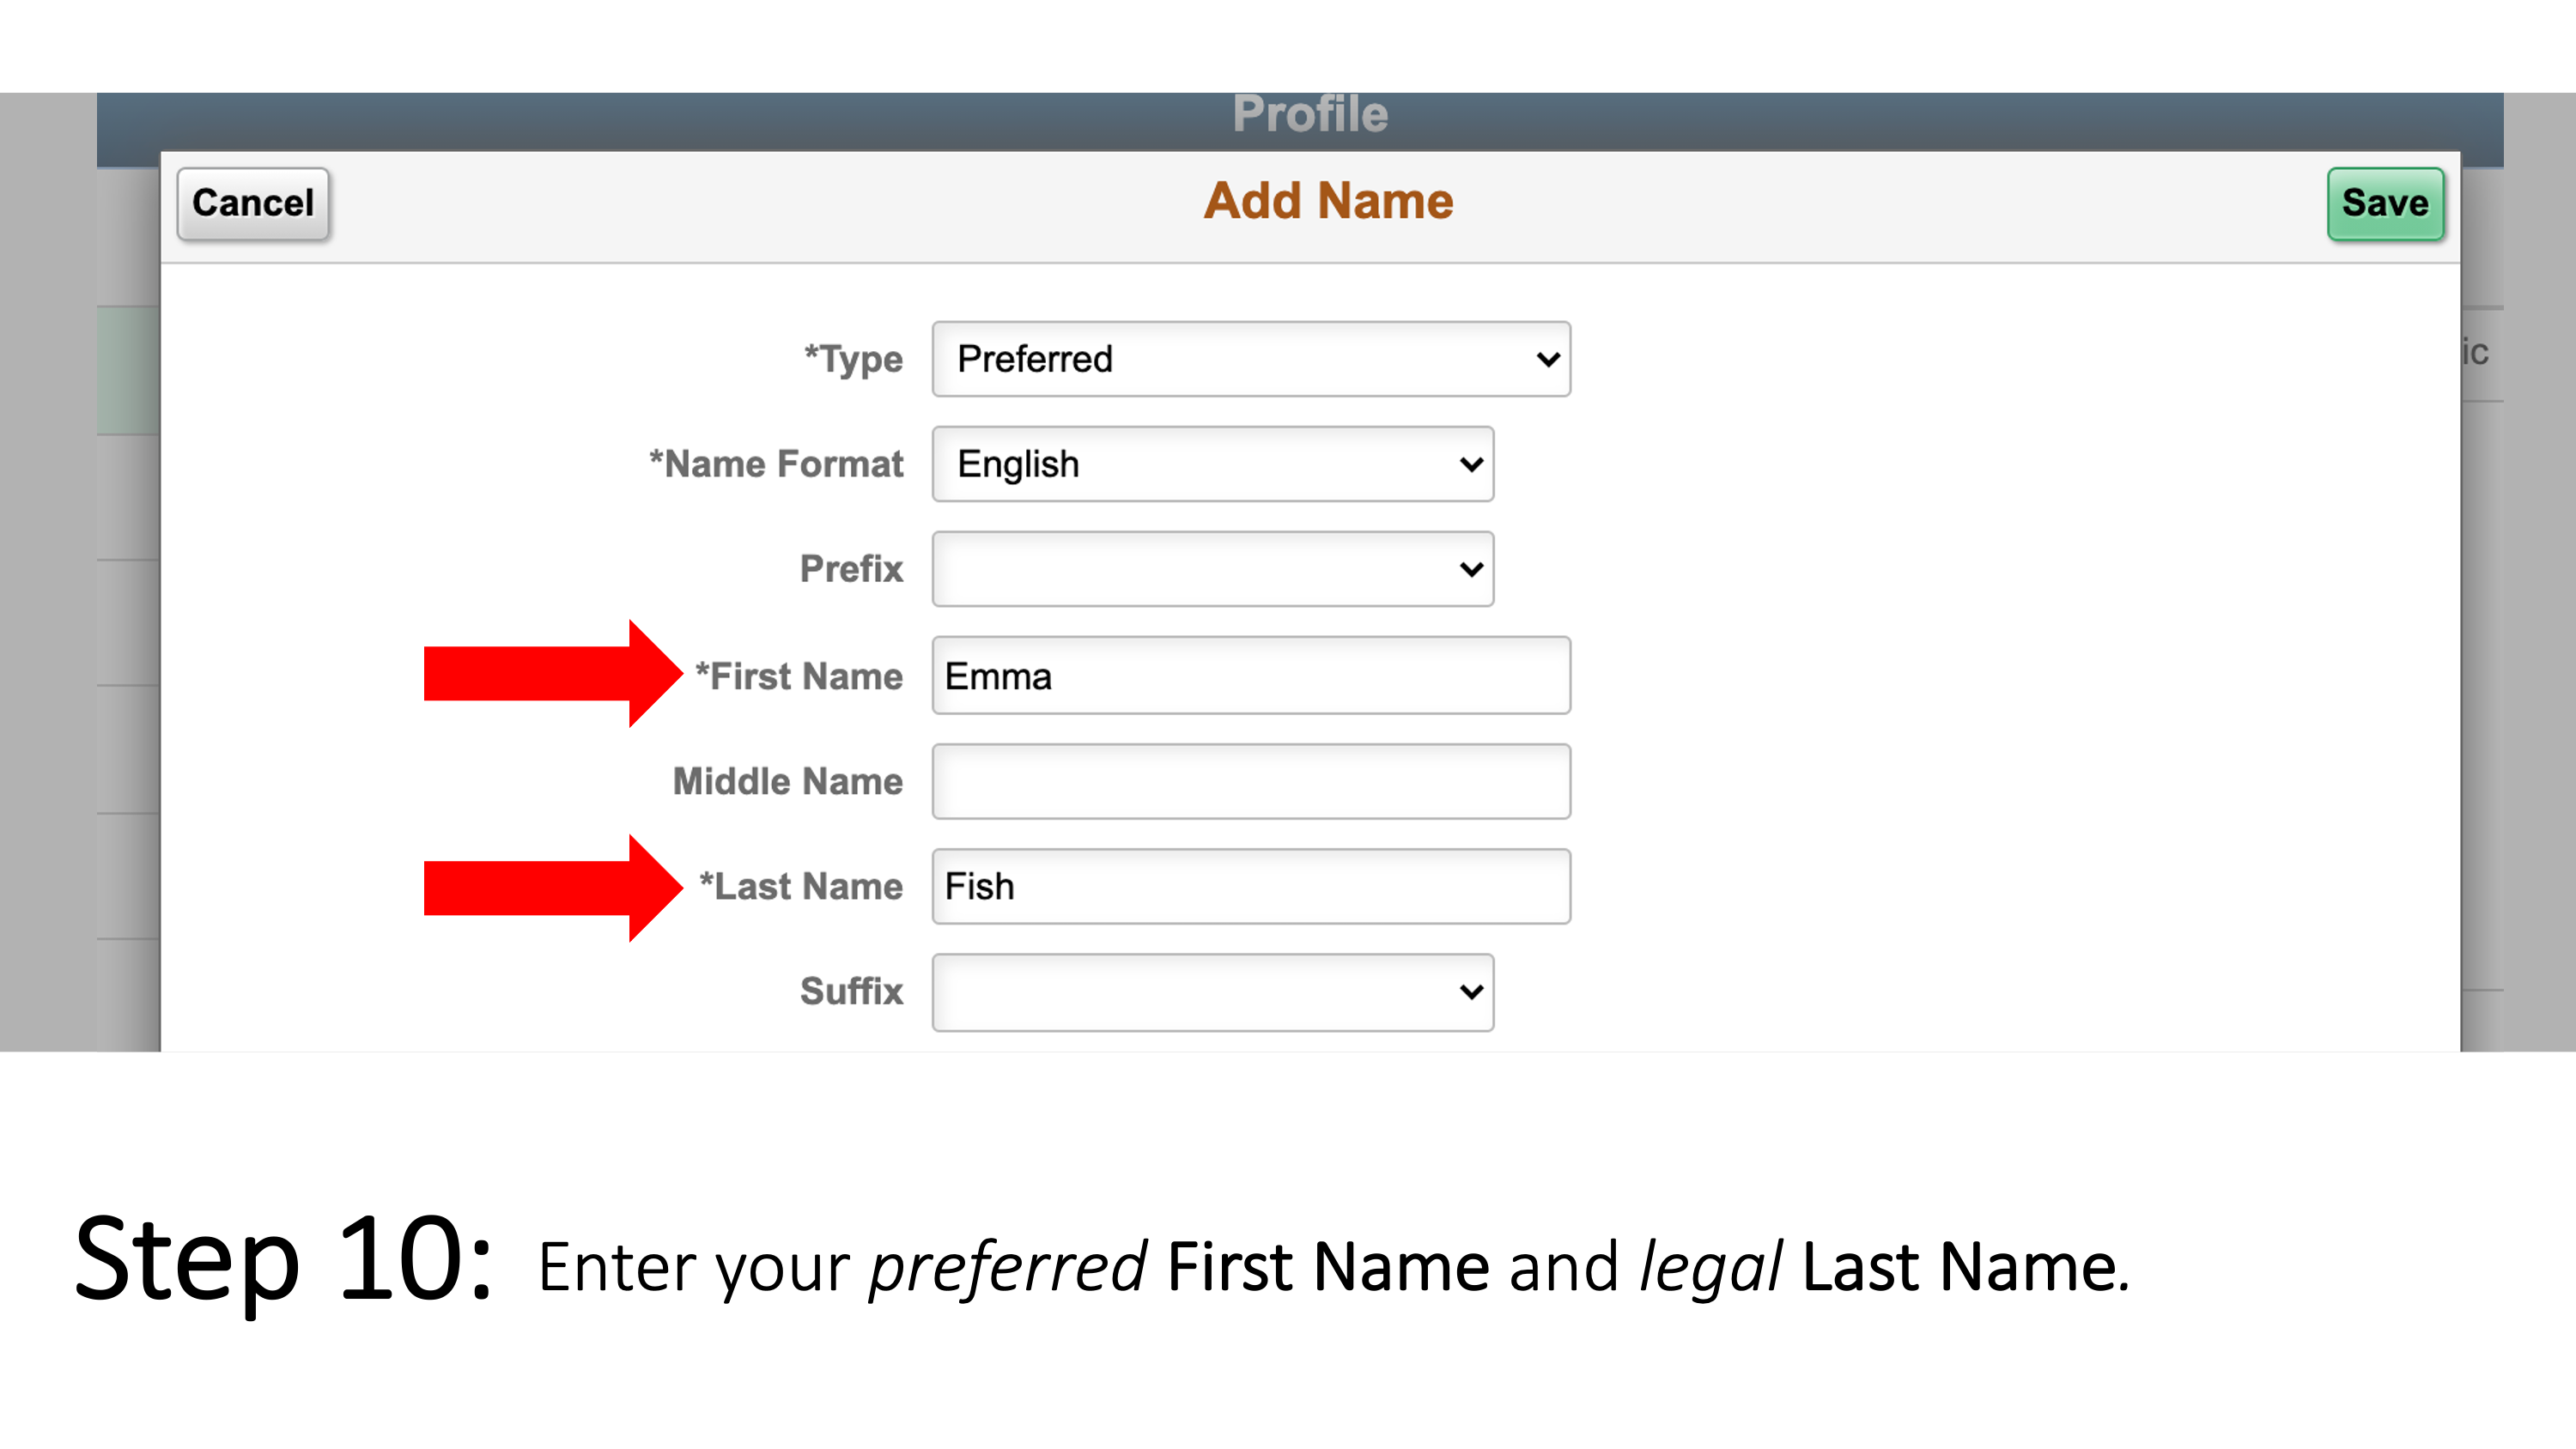 Enter your preferred First Name and legal Last Name.